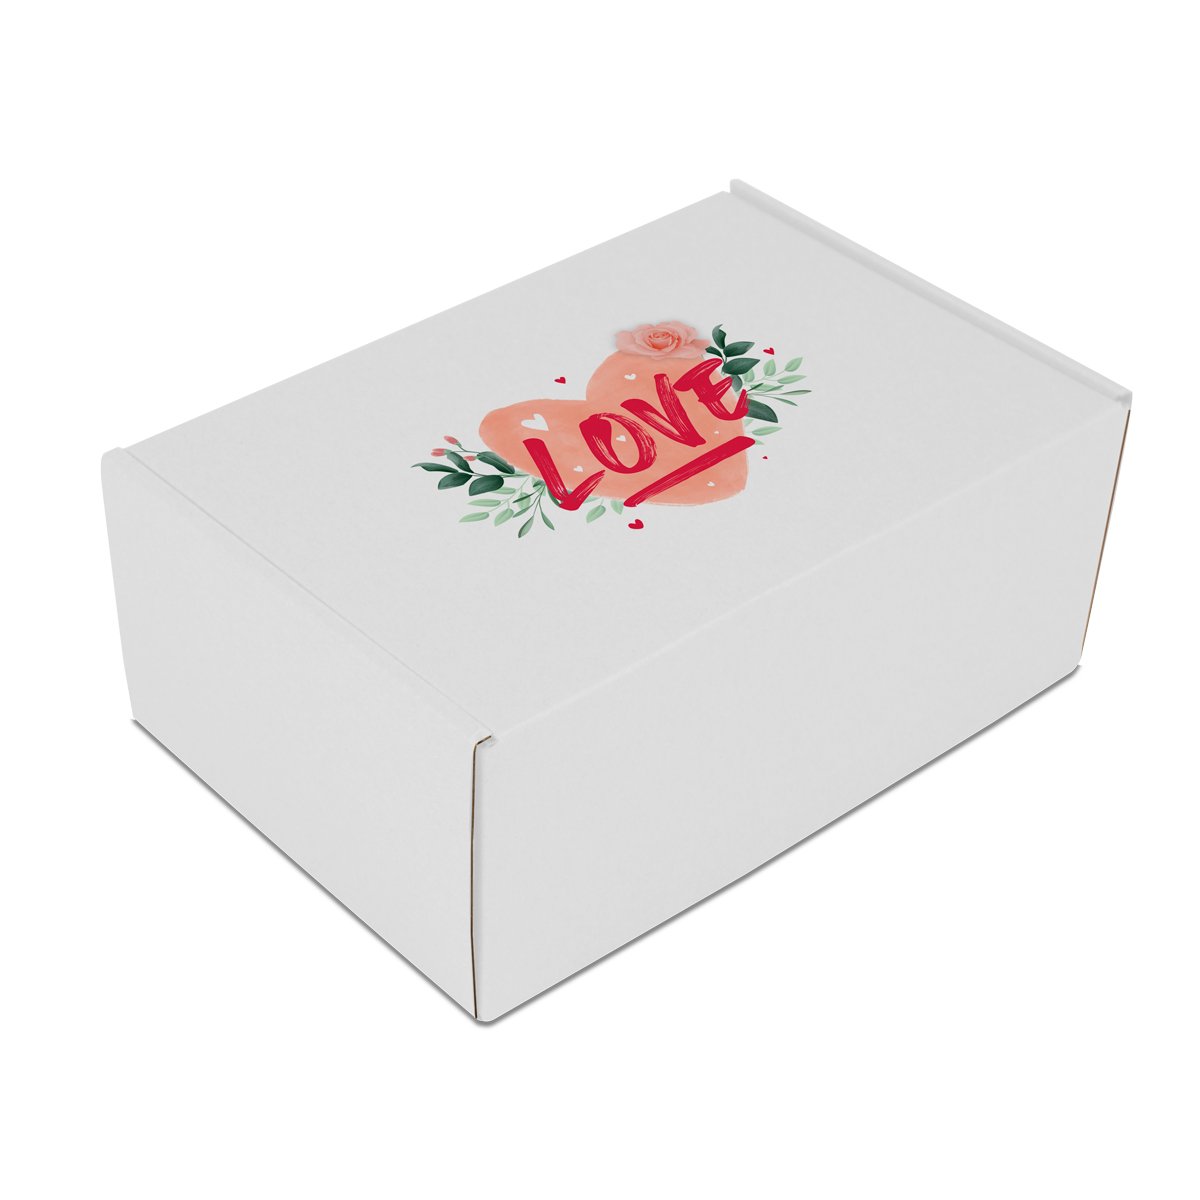 PACKQUEEN 30 Gift Boxes 6x6x4 Inches Small Gift India | Ubuy